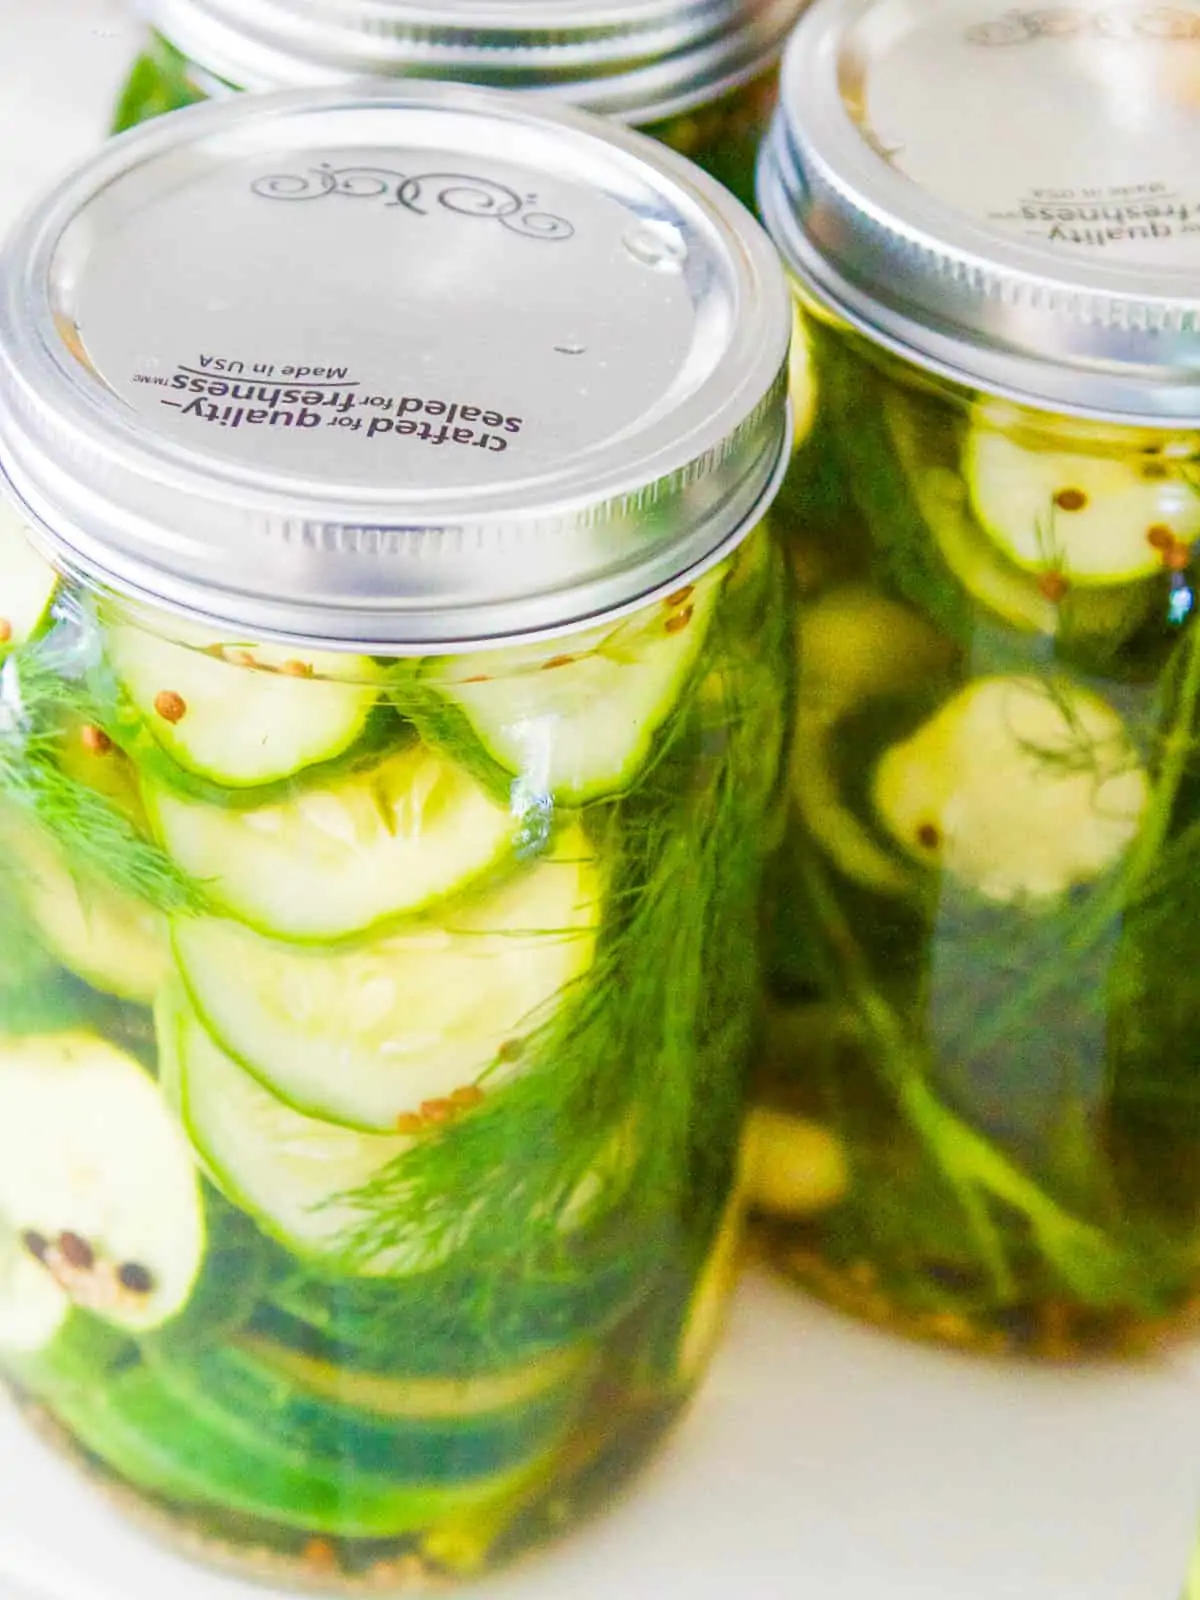 Several jars of homemade pickles on a white table.